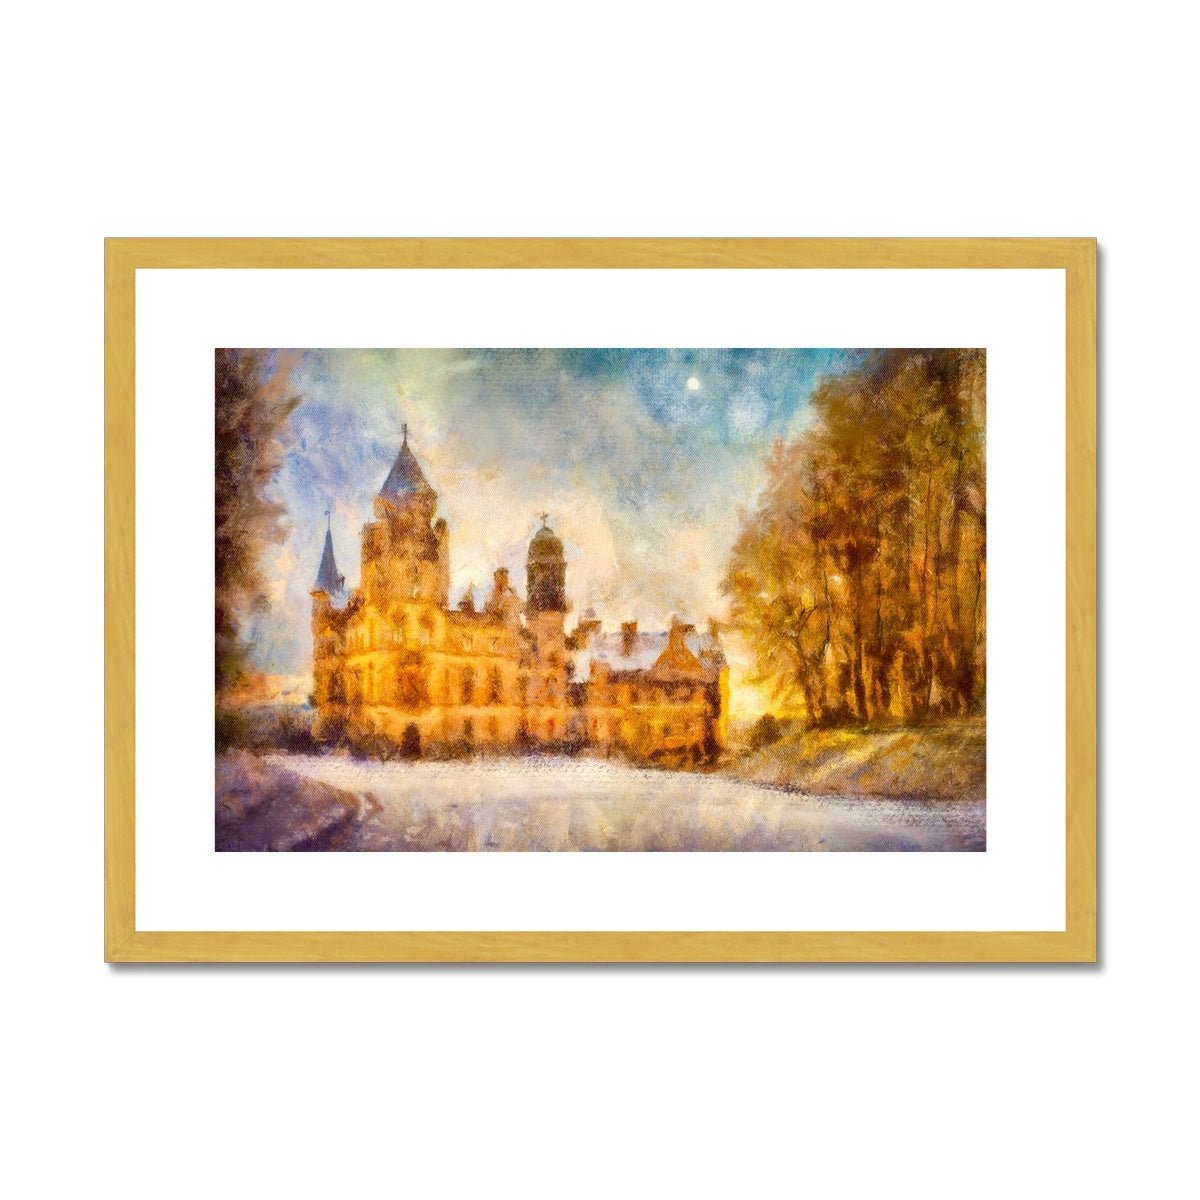 Dunrobin Castle Moonlight Painting | Antique Framed & Mounted Prints From Scotland-Antique Framed & Mounted Prints-Historic & Iconic Scotland Art Gallery-A2 Landscape-Gold Frame-Paintings, Prints, Homeware, Art Gifts From Scotland By Scottish Artist Kevin Hunter